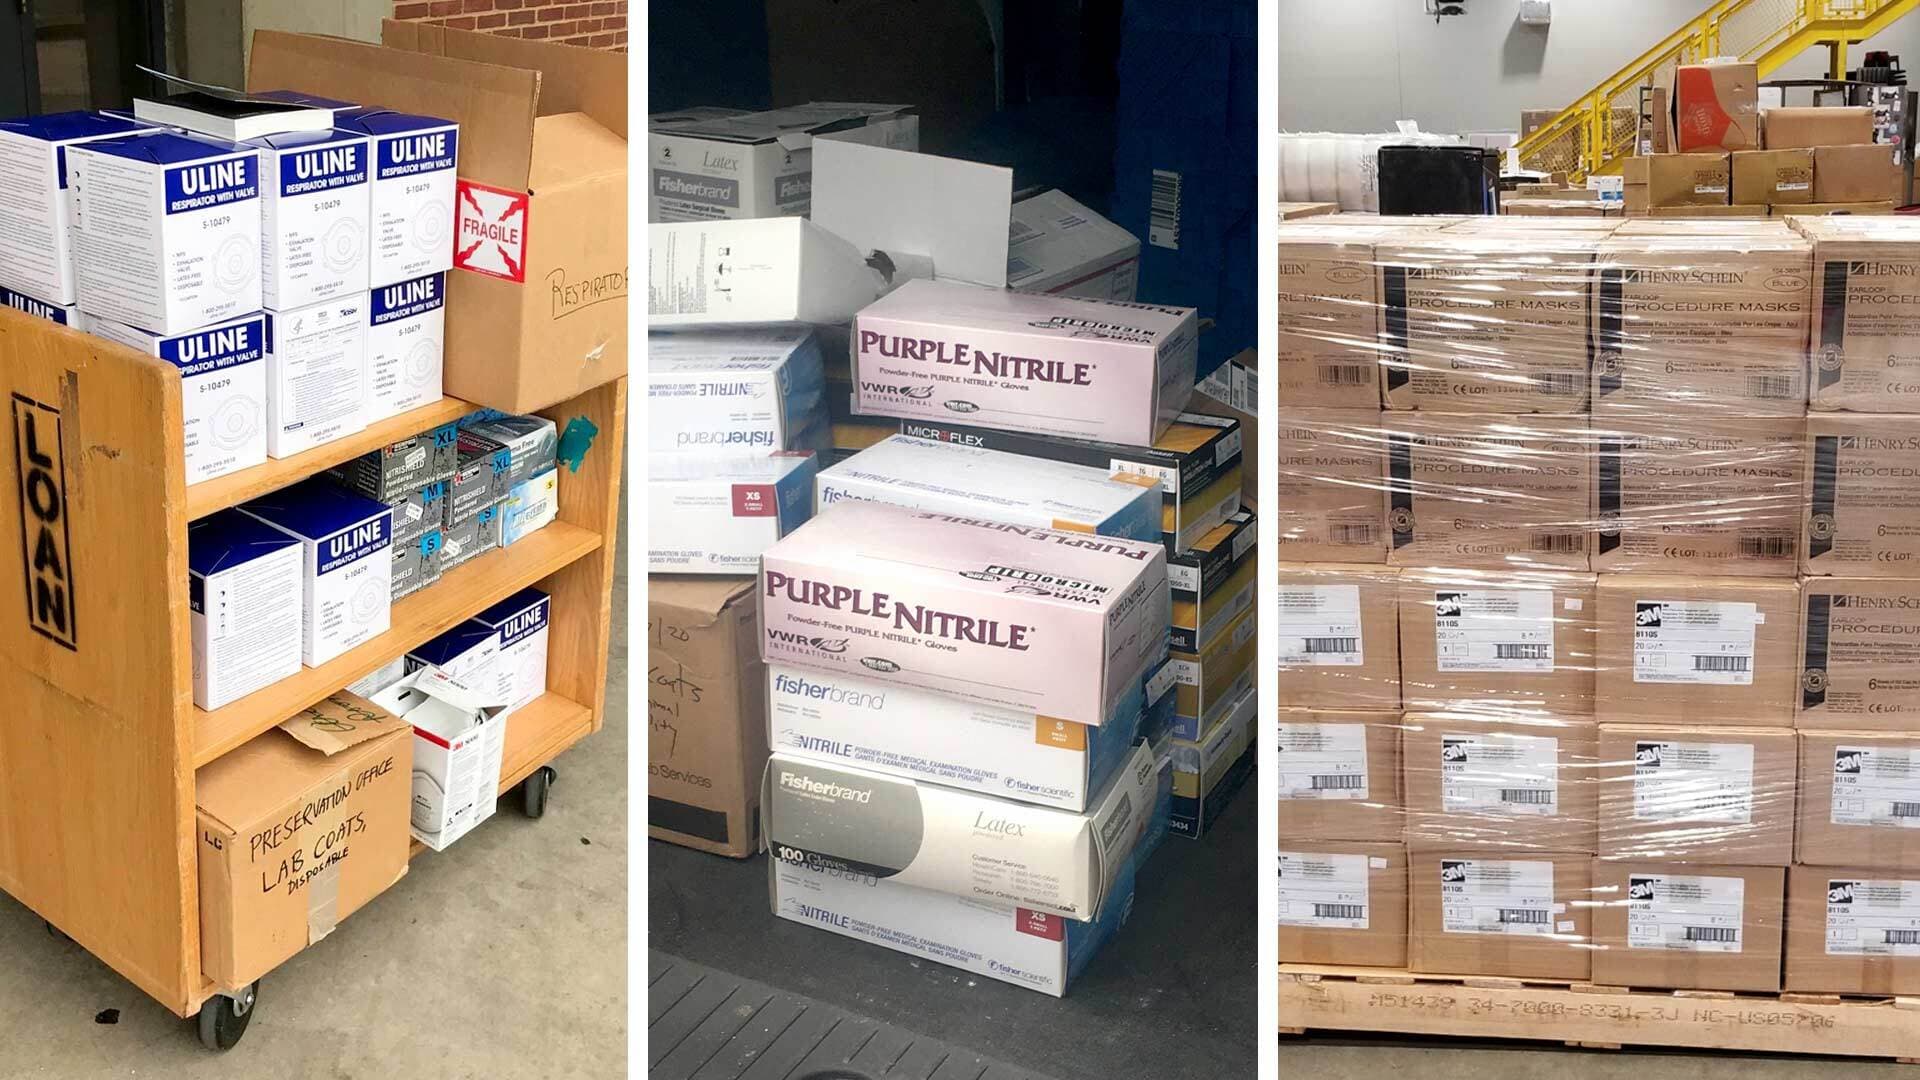 Students, faculty and staff at UMD collected thousands of pairs of gloves, surgical masks and other medical supplies to donate to medical workers fighting the COVID-19 epidemic.